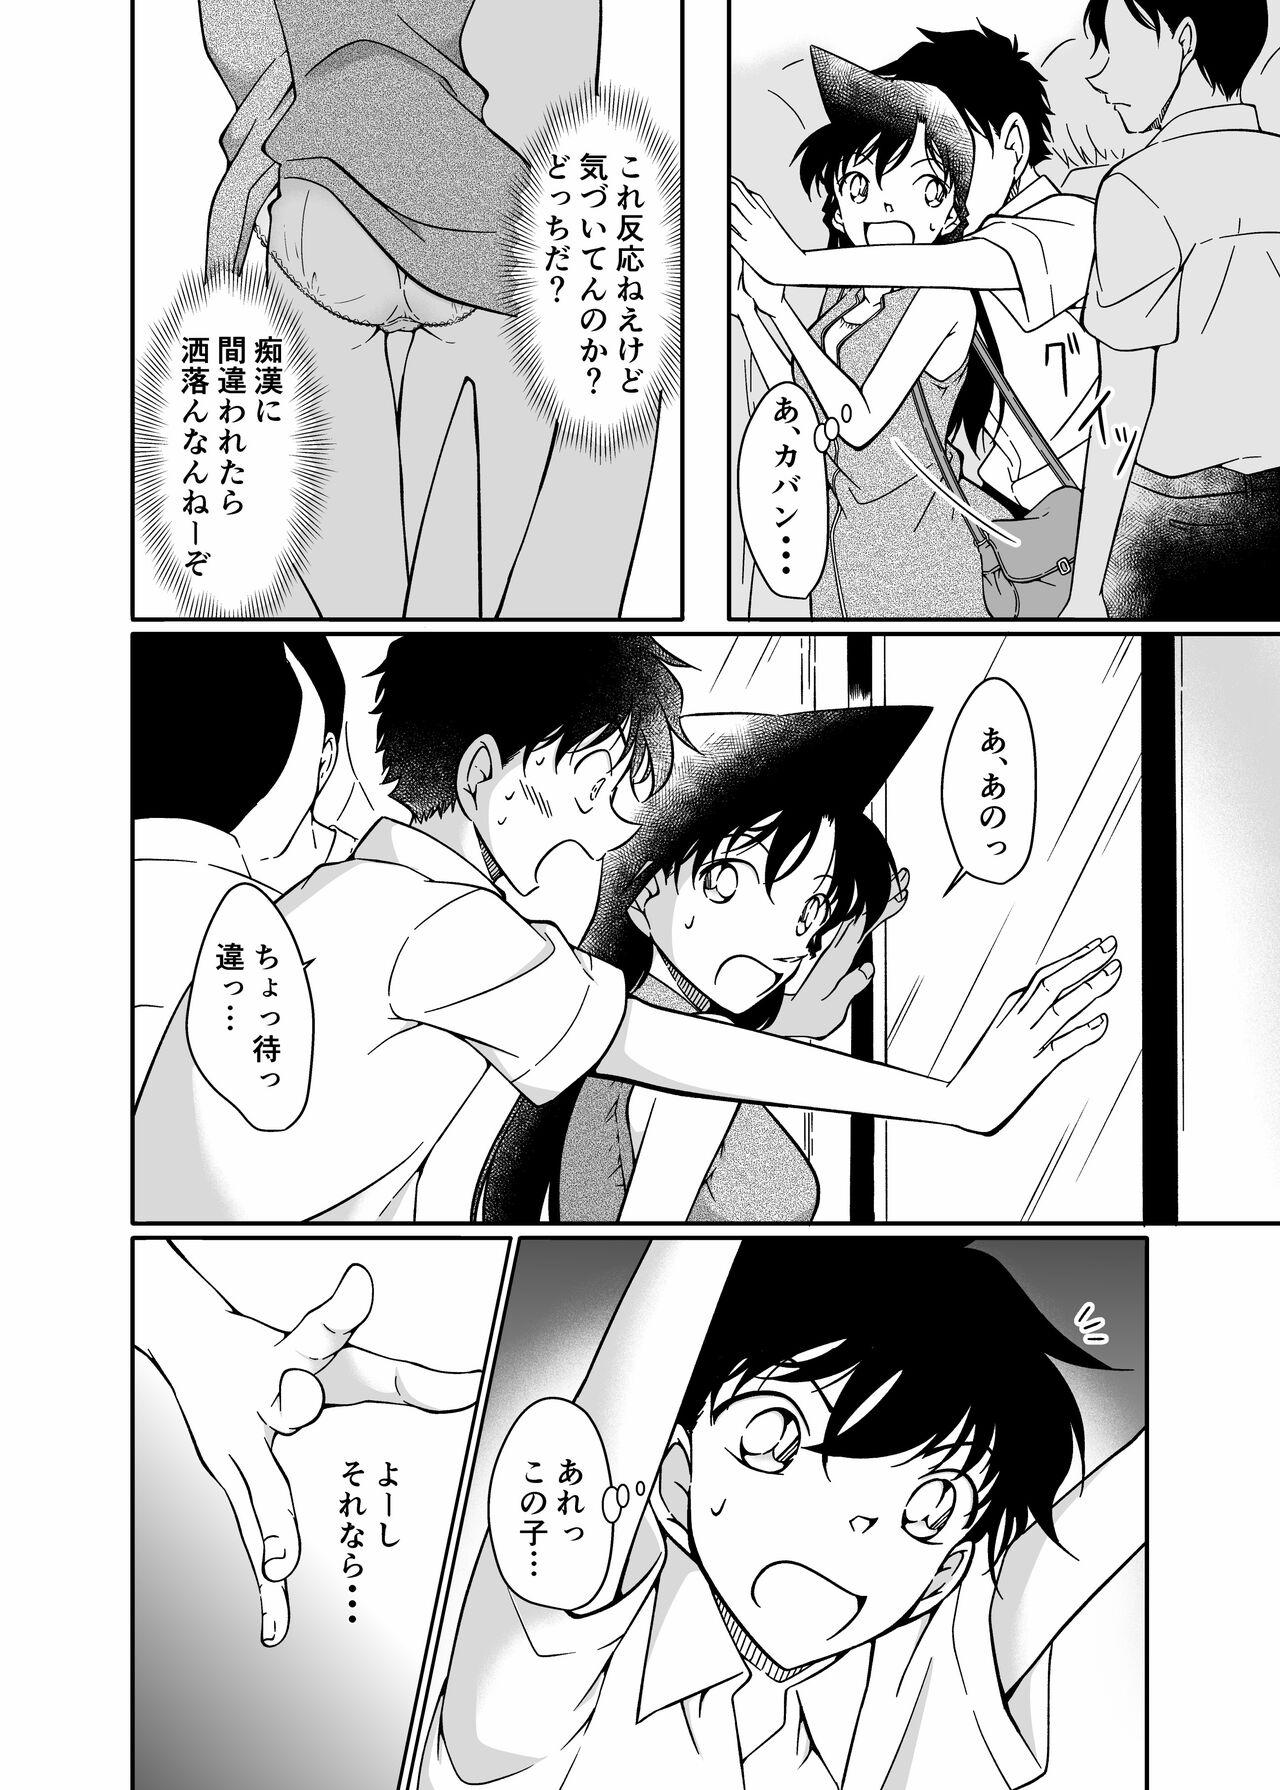 Facefuck Mischief in a crowded train - Detective conan | meitantei conan Big Pussy - Page 3